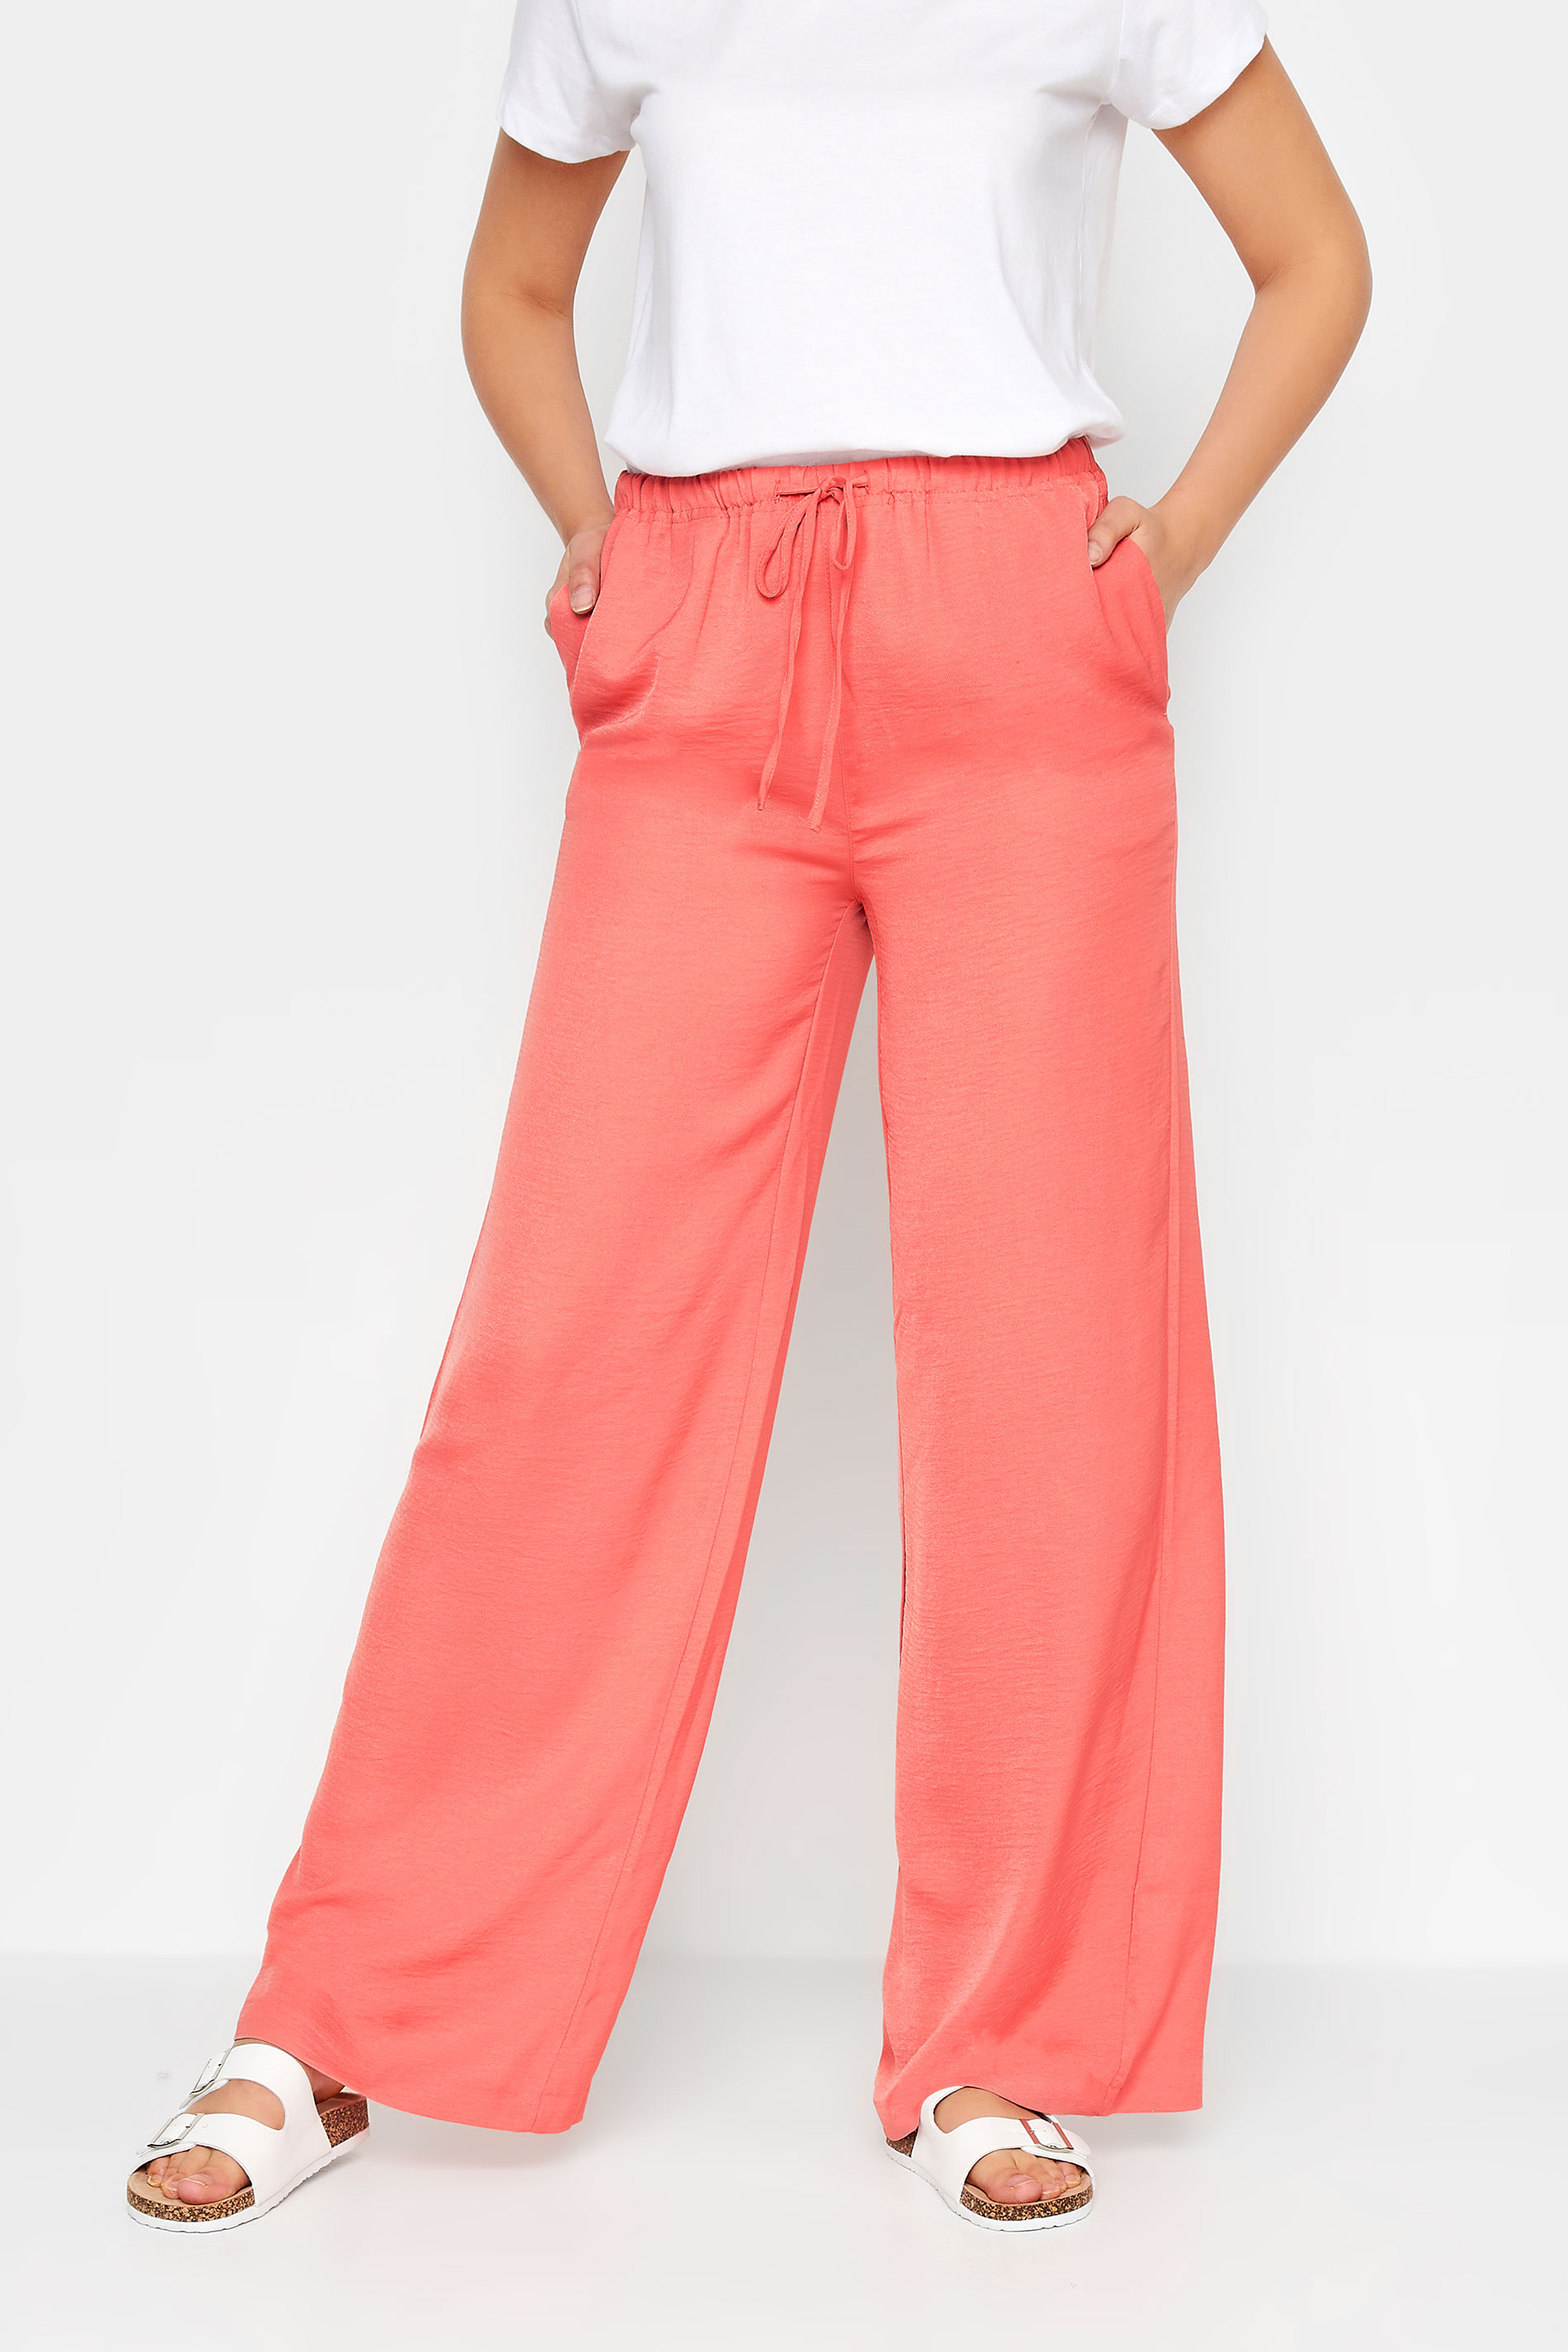 LTS Approved Best Trousers For Tall Ladies  Long Tall Sally